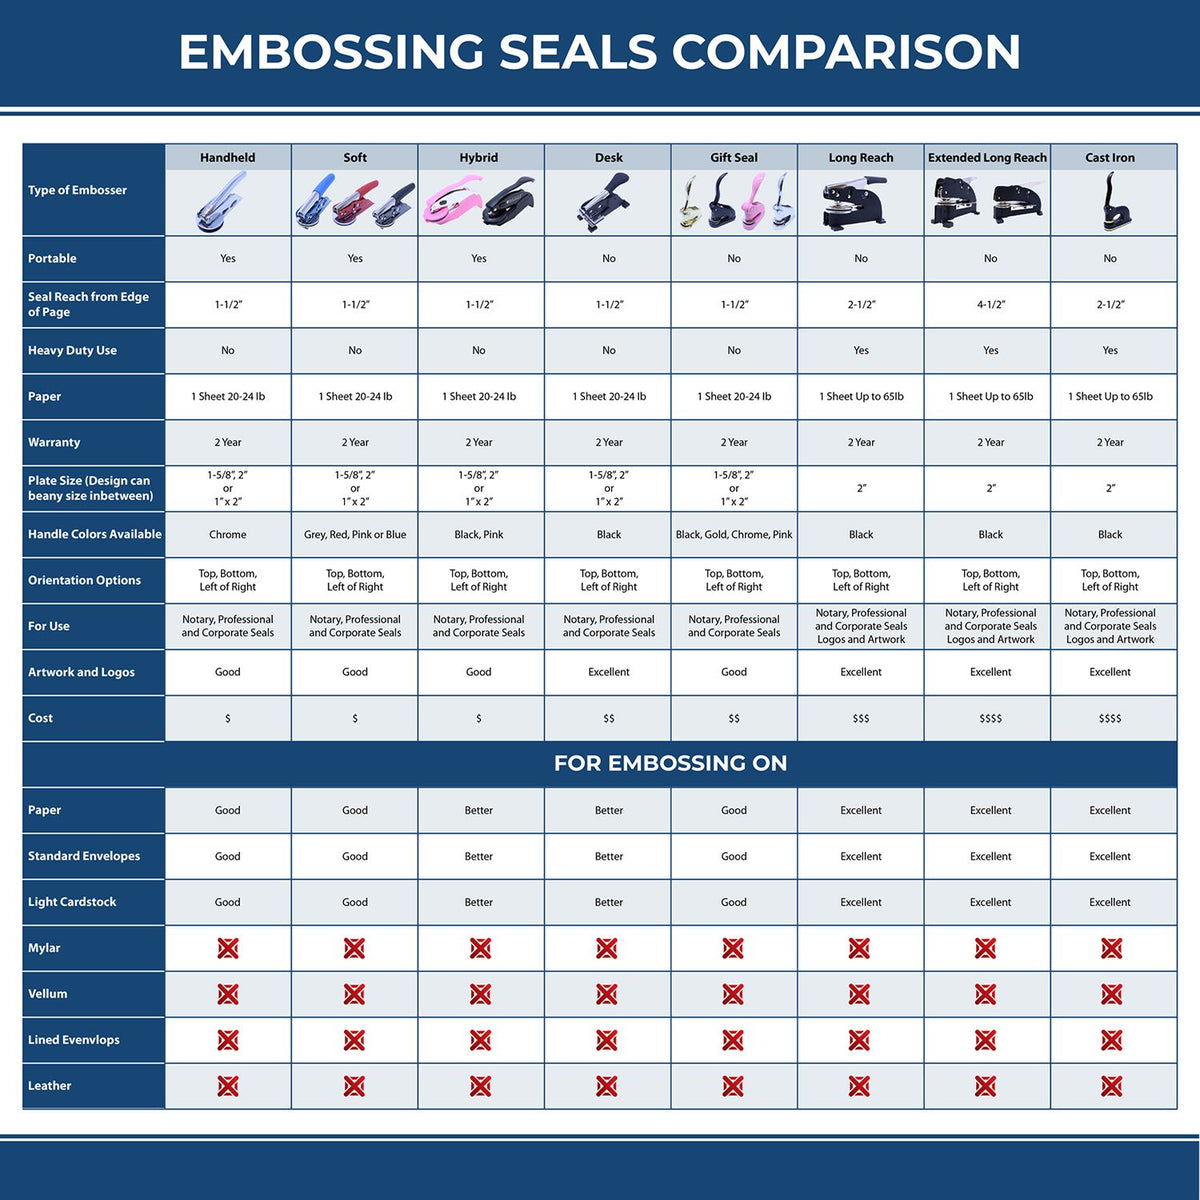 A comparison chart for the different types of mount models available for the Hybrid Missouri Land Surveyor Seal